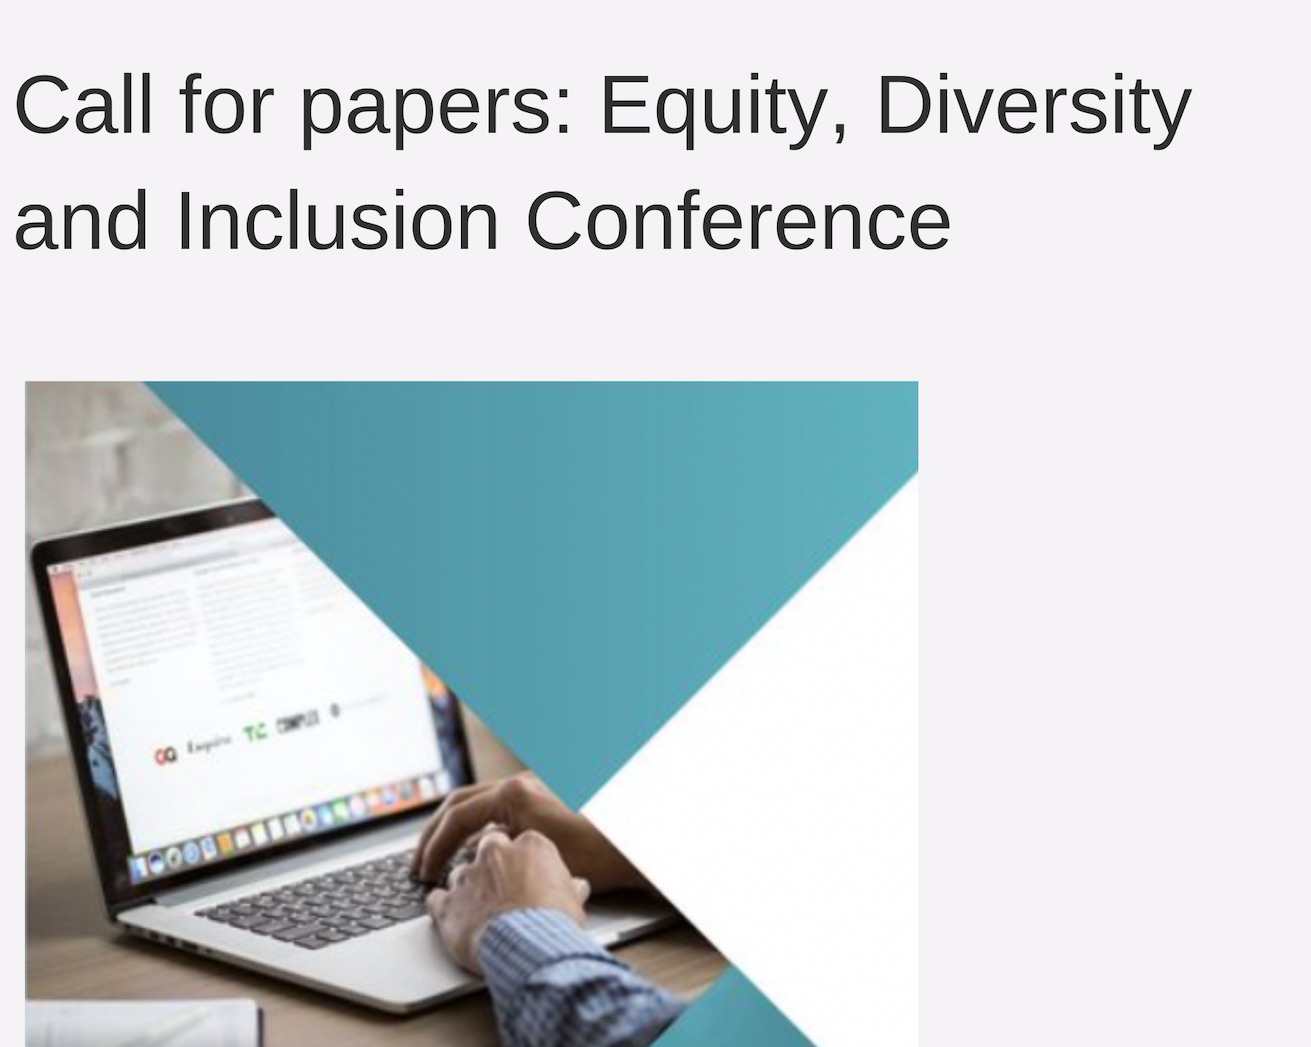 Call For Papers Conference On Equity Diversity And Inclusion Deadline Feb 25th 2022 7991